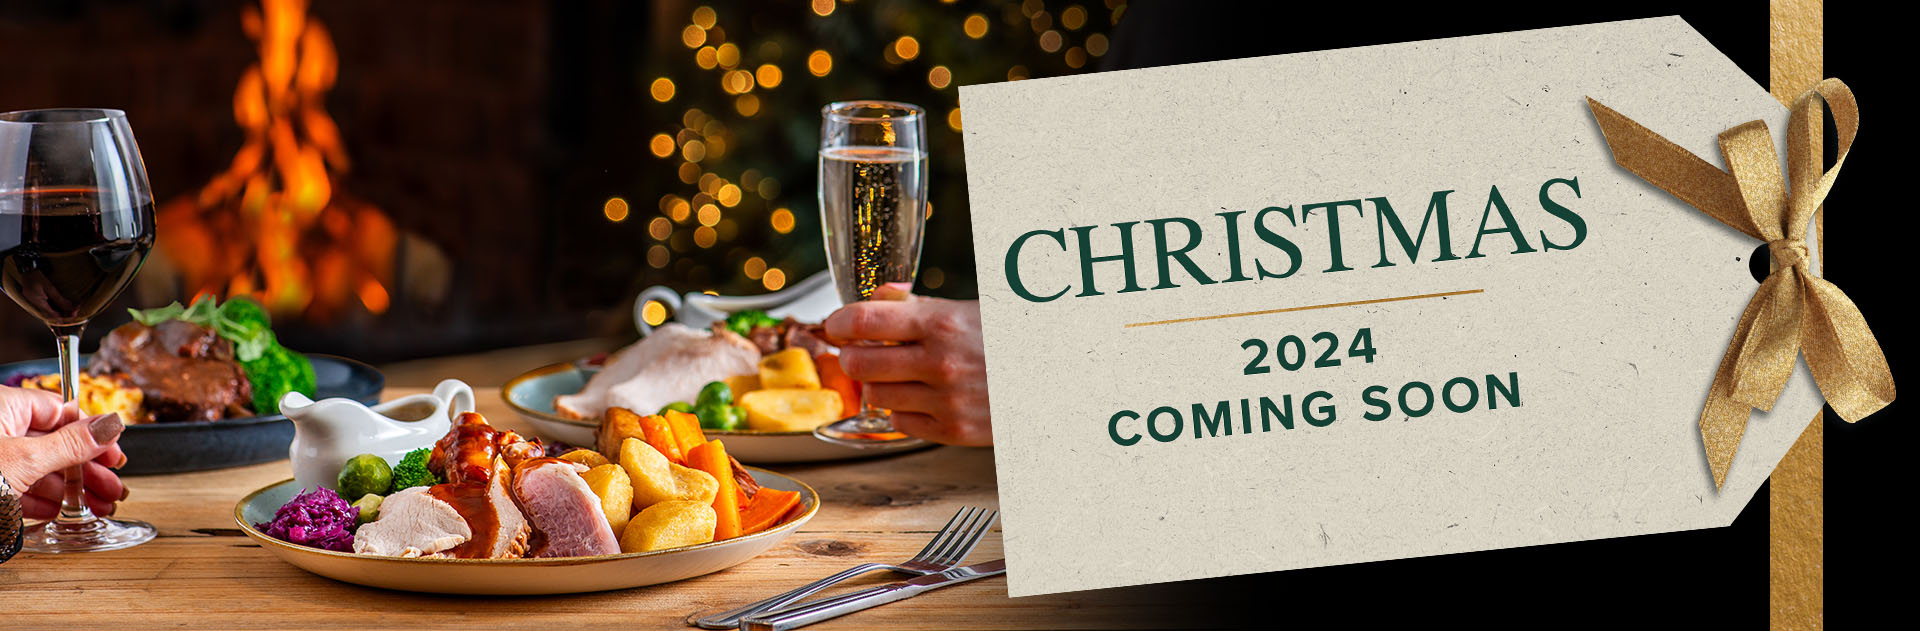 Christmas at The Rose and Crown 